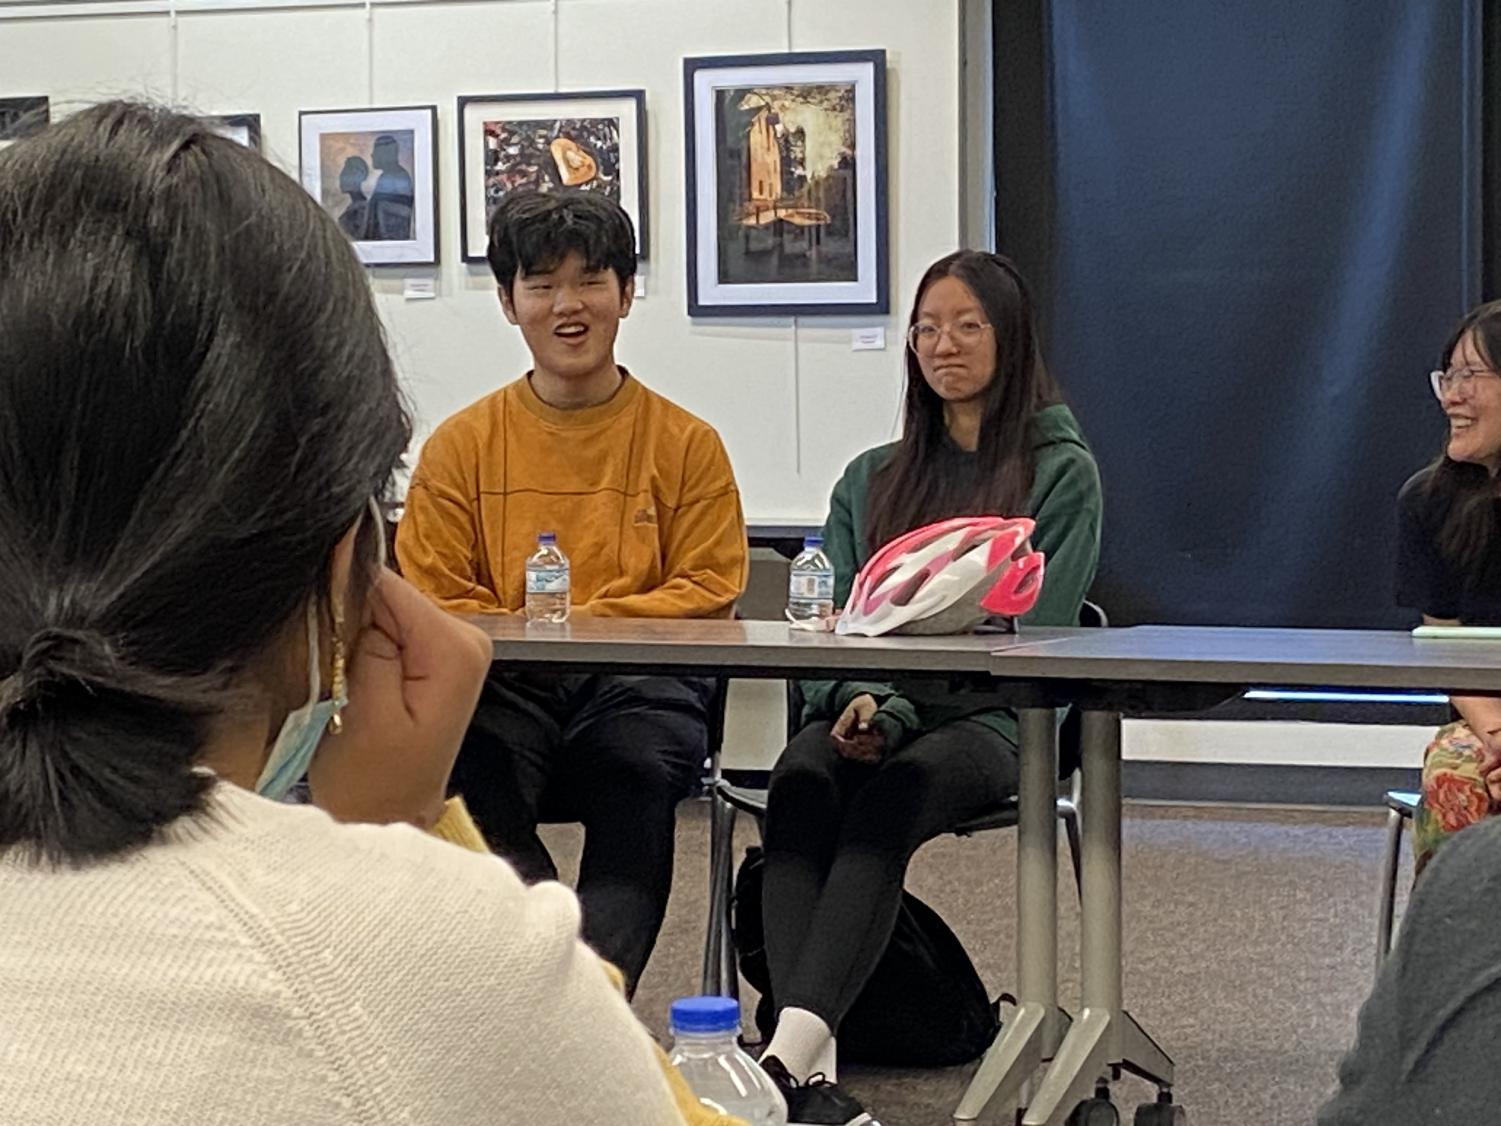 Kuang and Zhang  spoke candidly about their high school journey, sharing their regrets as well as successes and reflecting on the challenges they faced. 
